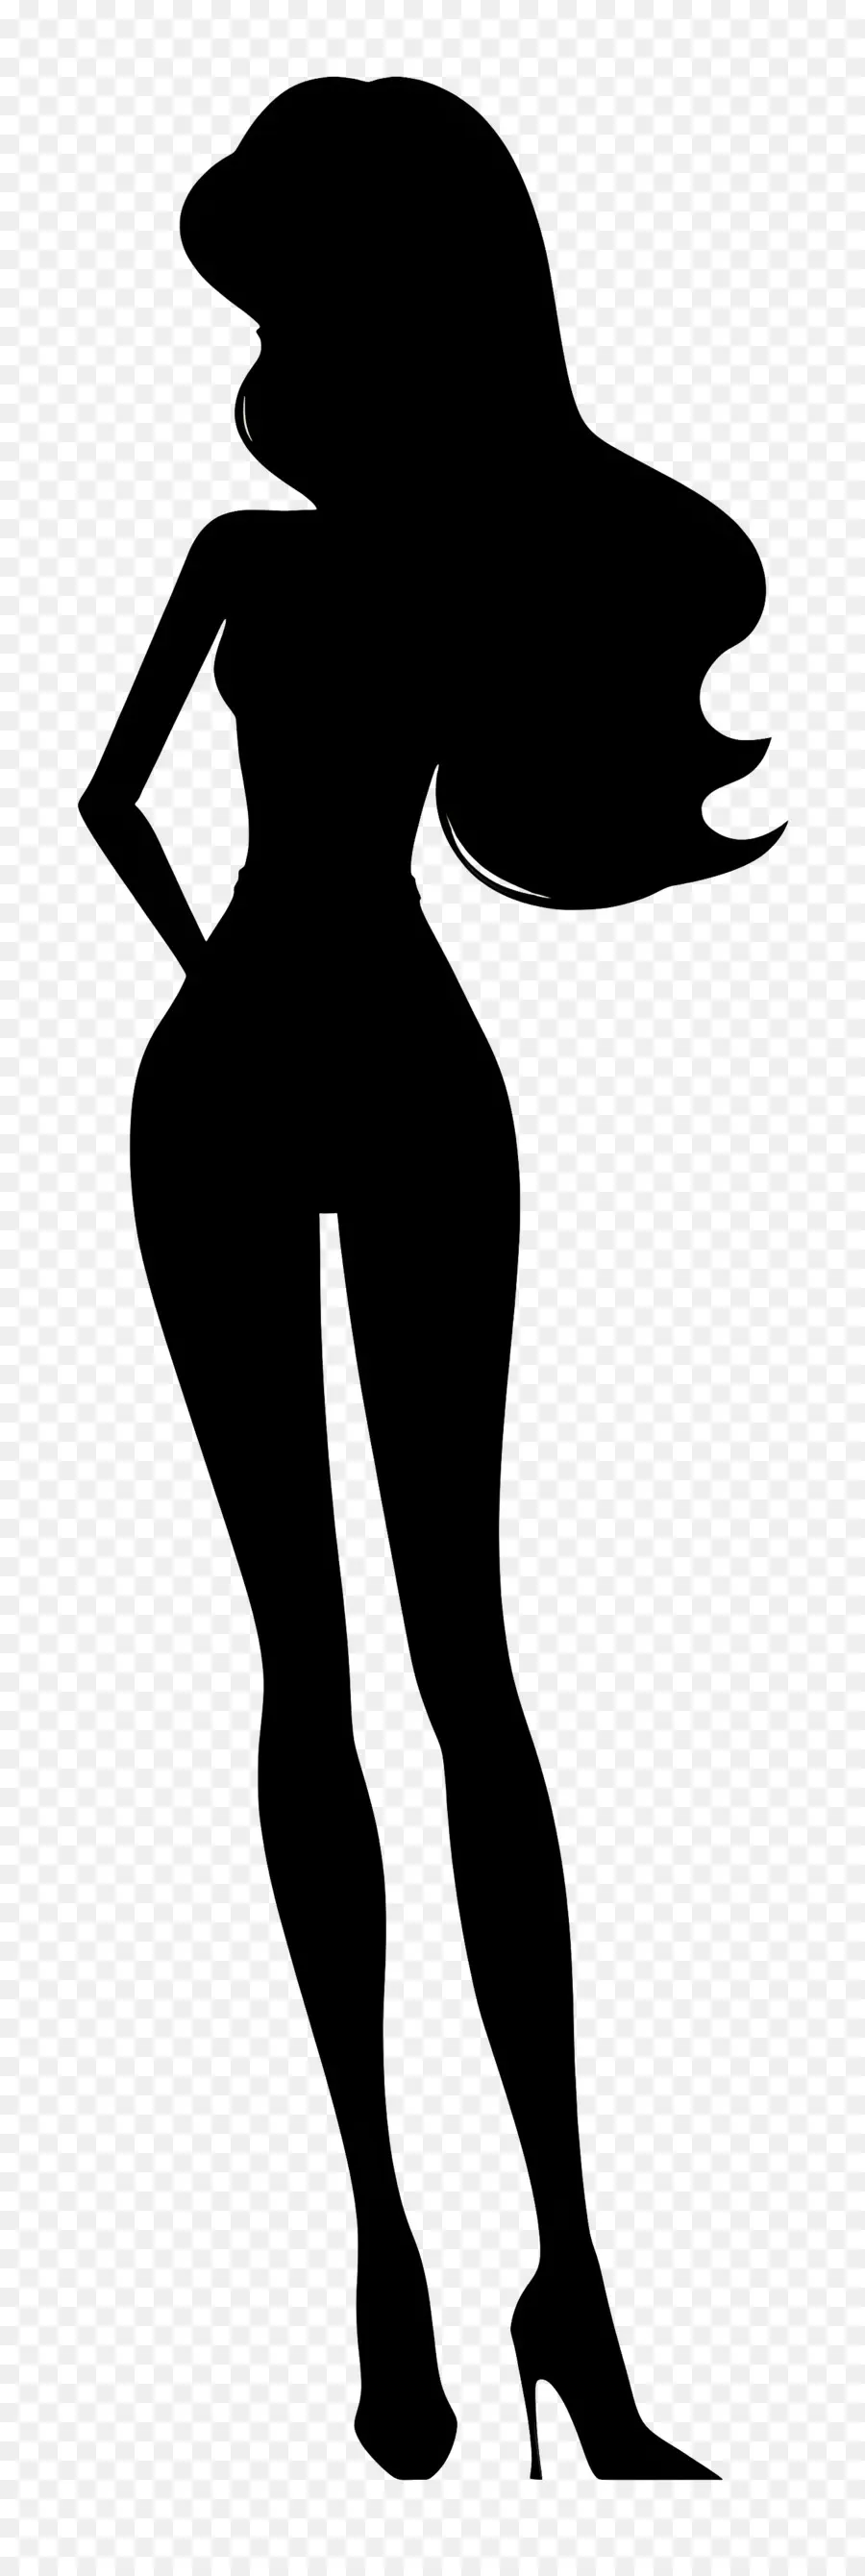 barbie silhouette silhouette woman arms outstretched long and slender